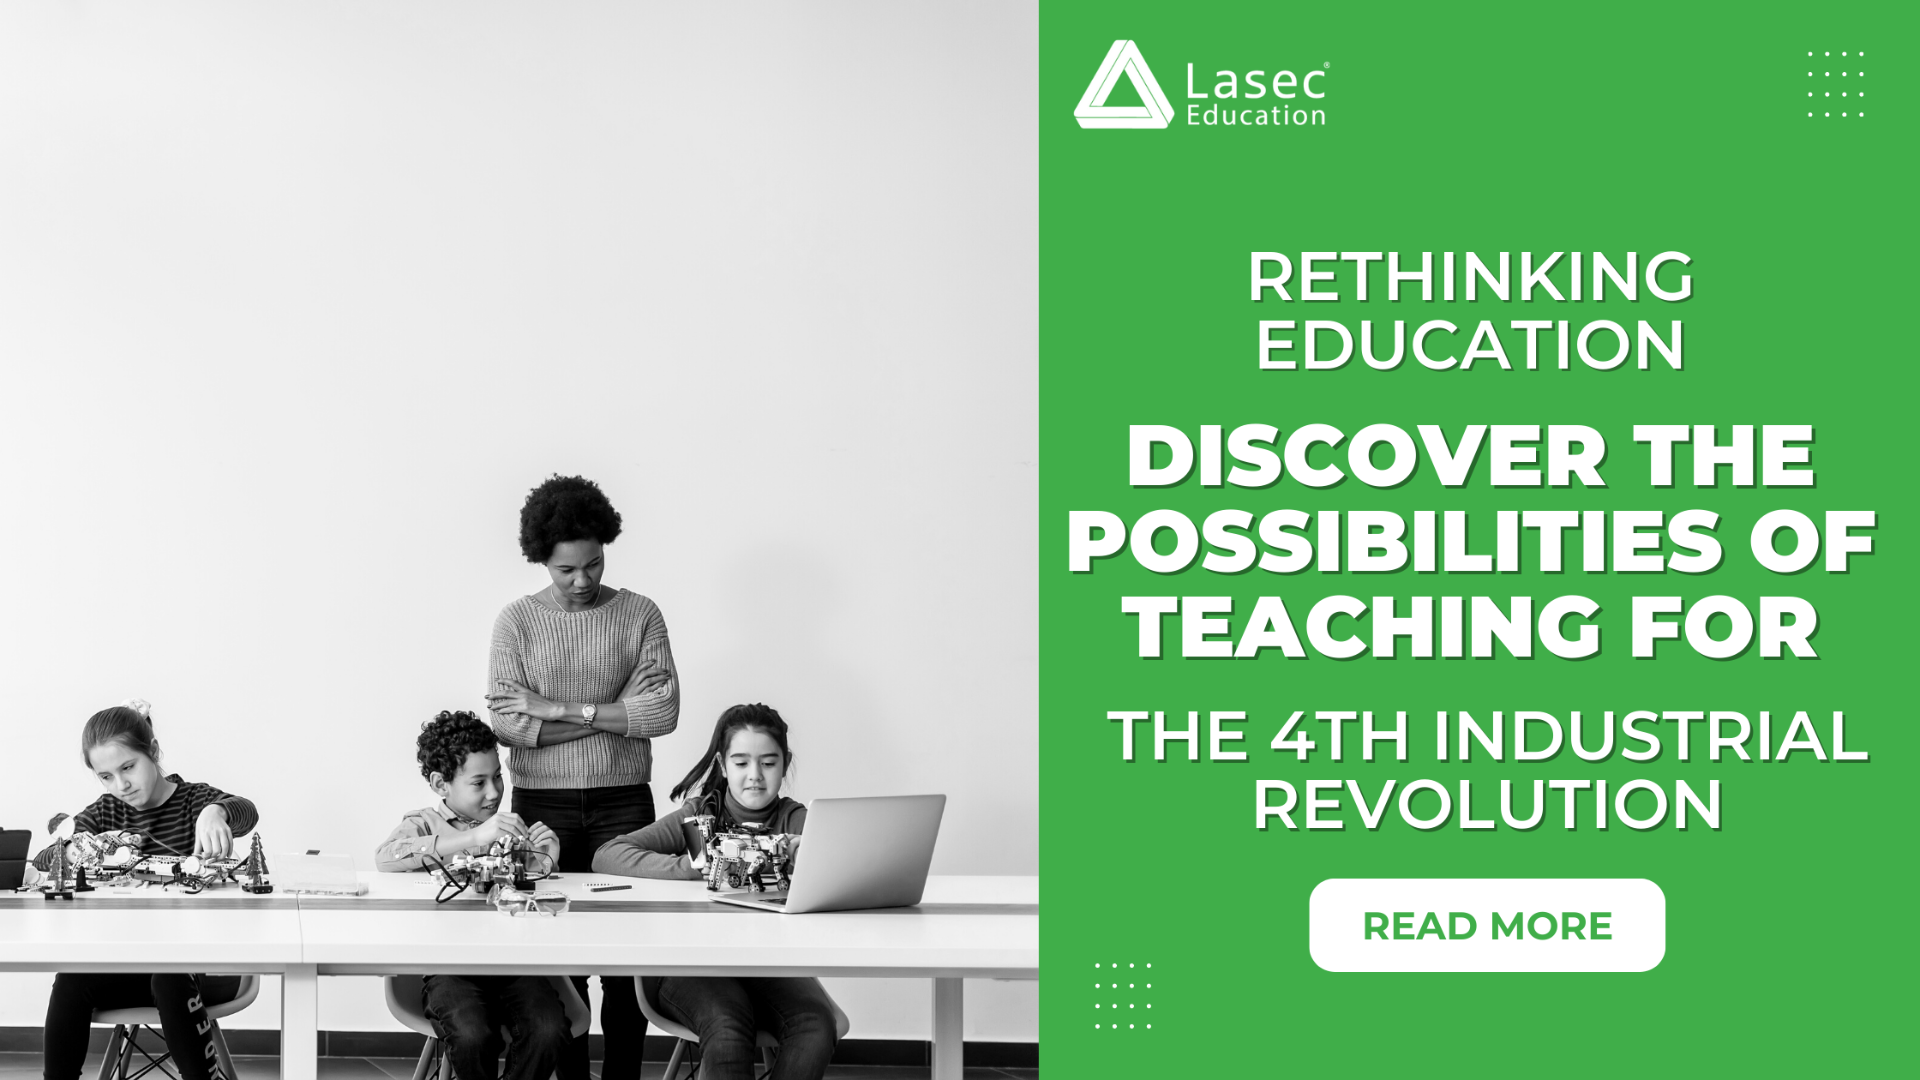 Rethinking Education Discover the Possibilities of Teaching for the 4th Industrial Revolution